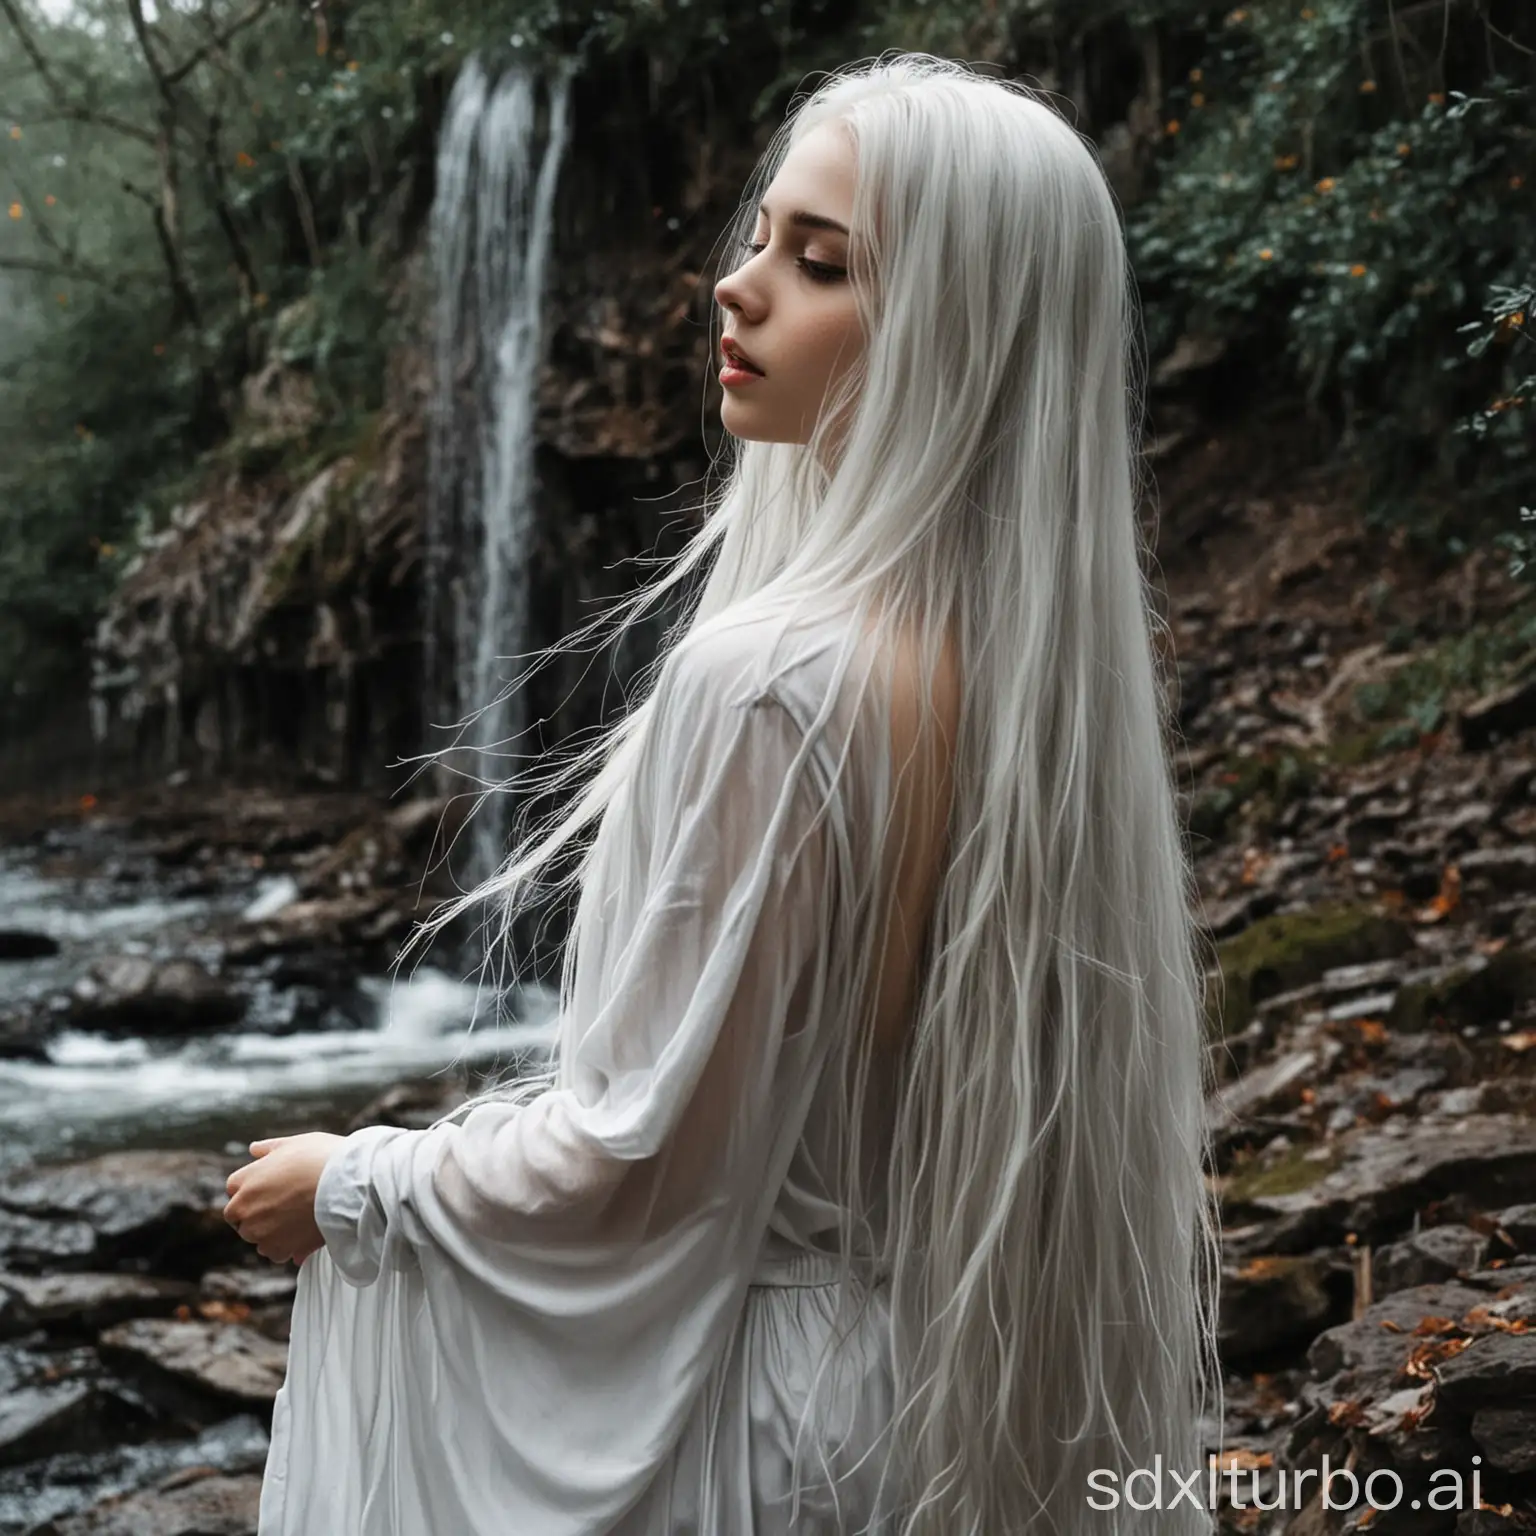 Graceful-Woman-with-Flowing-GrayishWhite-Hair-in-a-BloodSoaked-Scene